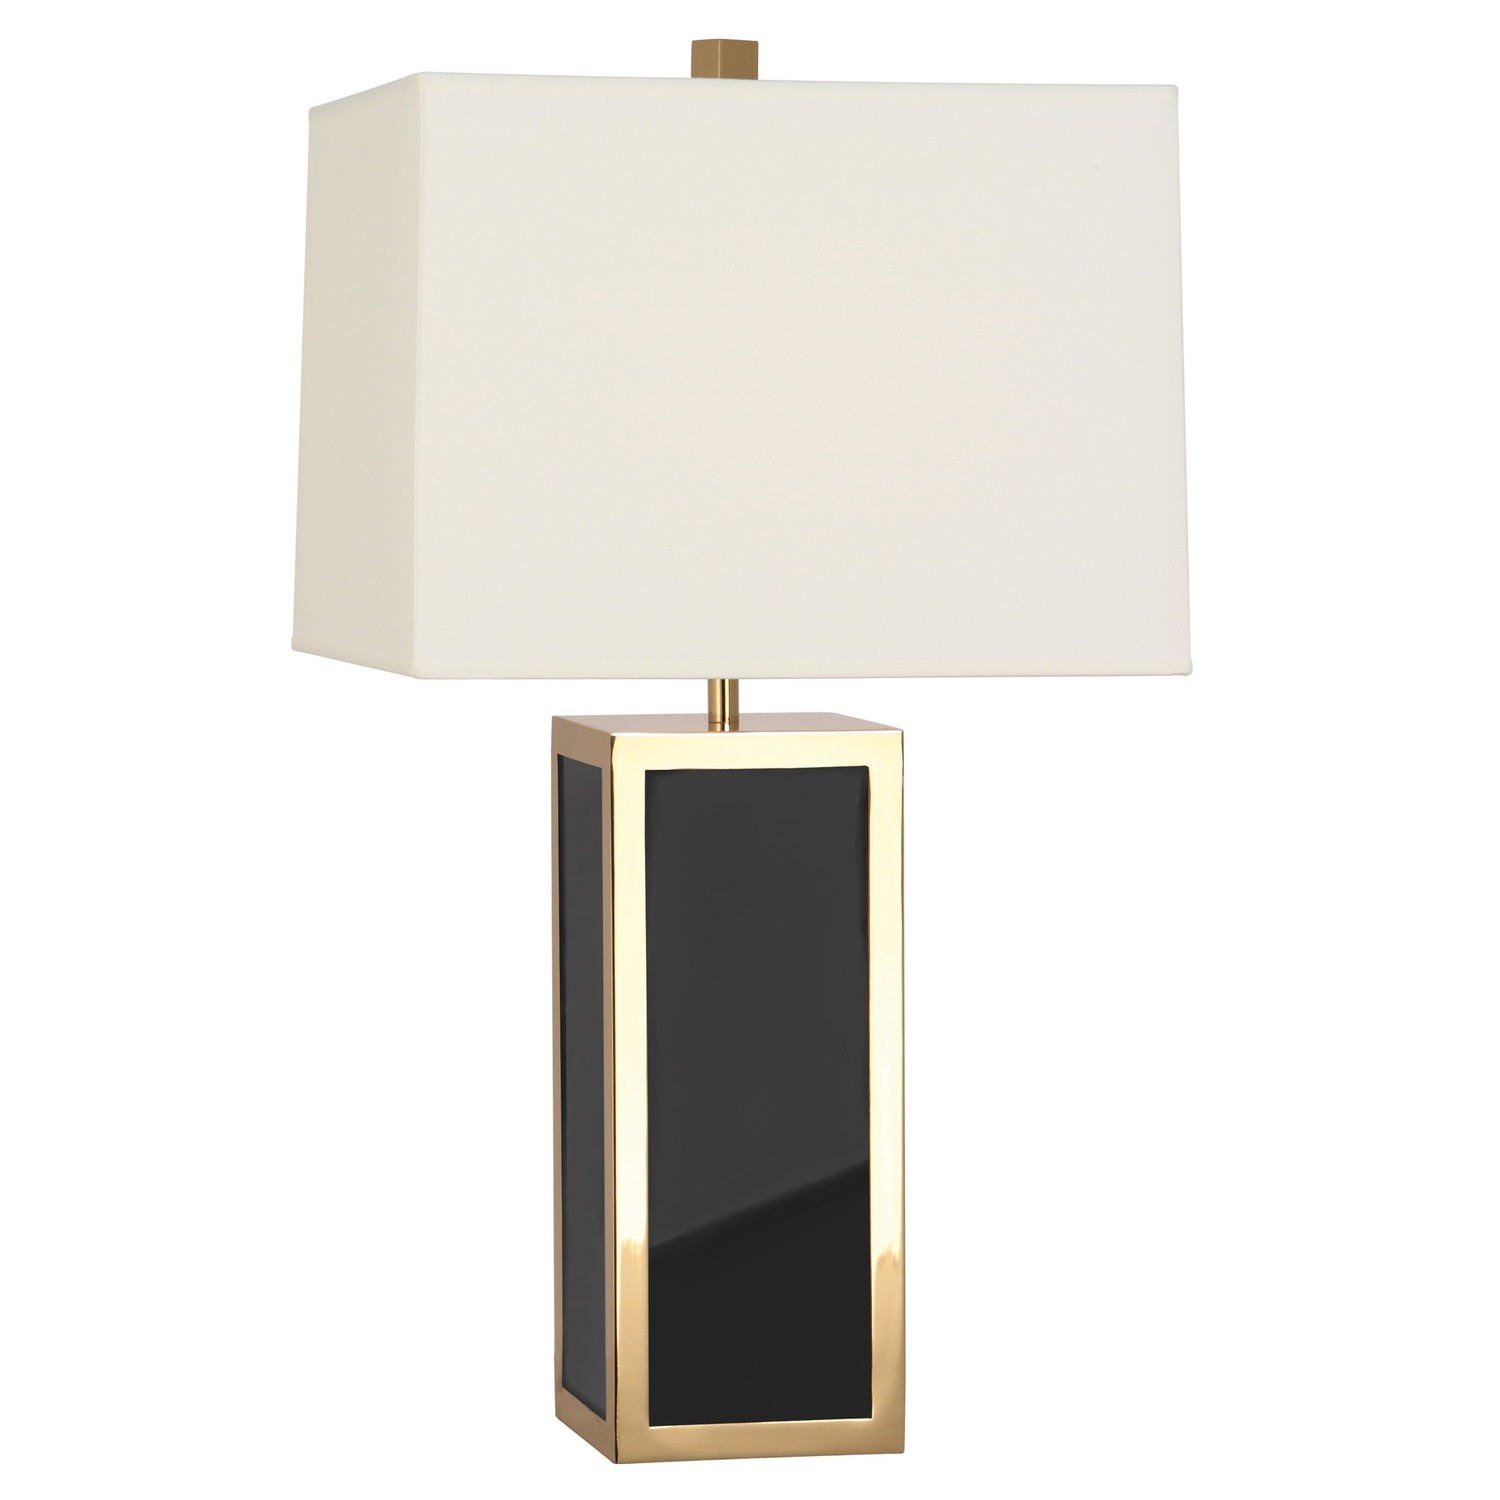 Barcelona Table Lamp | 5 Colors | Tall